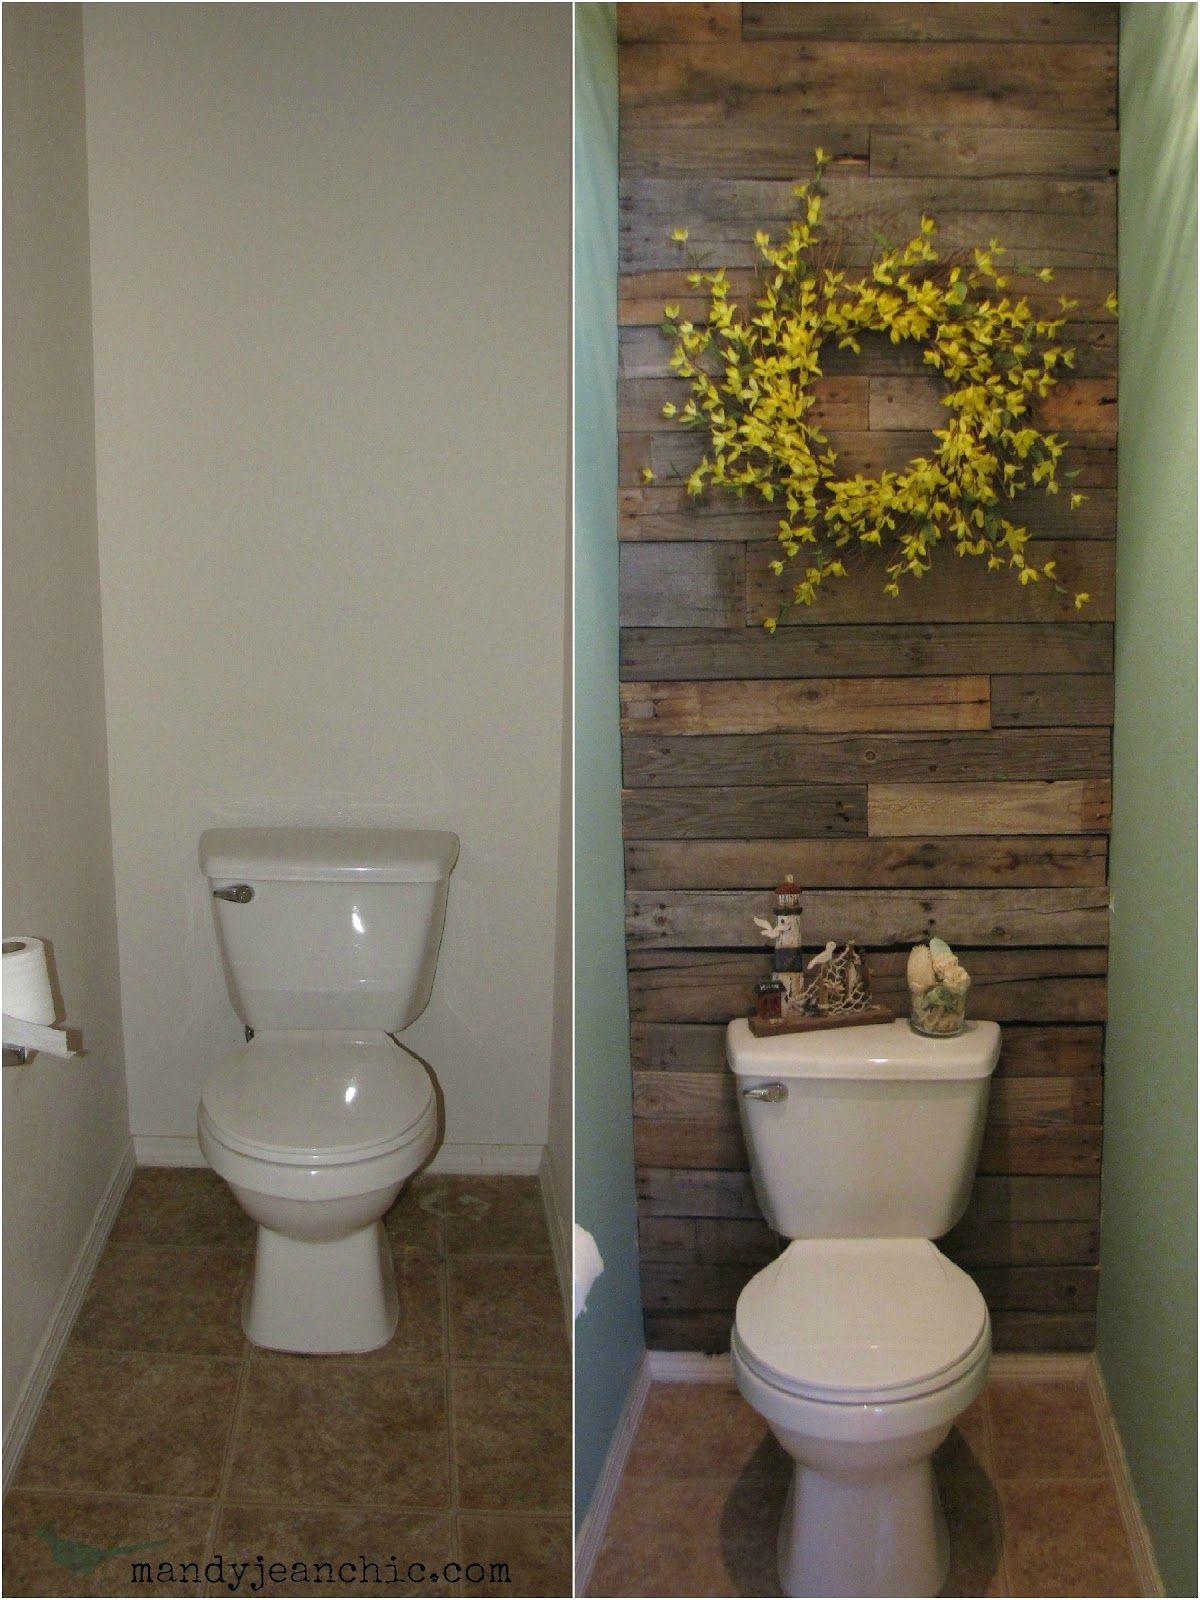 great project free toilet room makeover using pallet wood and leftover paint